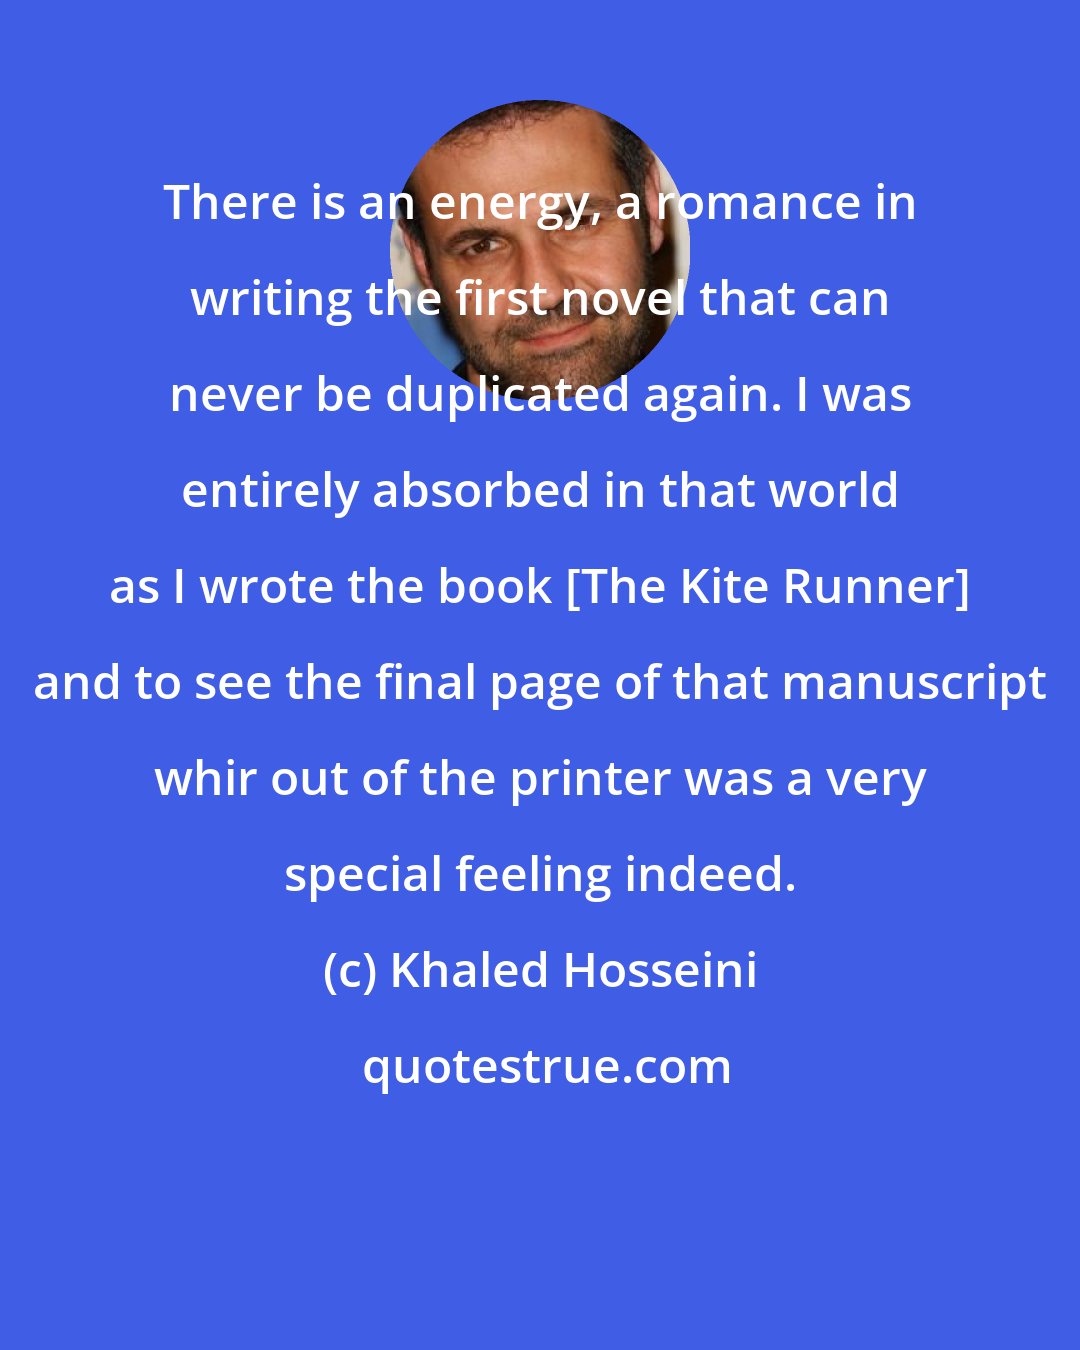 Khaled Hosseini: There is an energy, a romance in writing the first novel that can never be duplicated again. I was entirely absorbed in that world as I wrote the book [The Kite Runner] and to see the final page of that manuscript whir out of the printer was a very special feeling indeed.